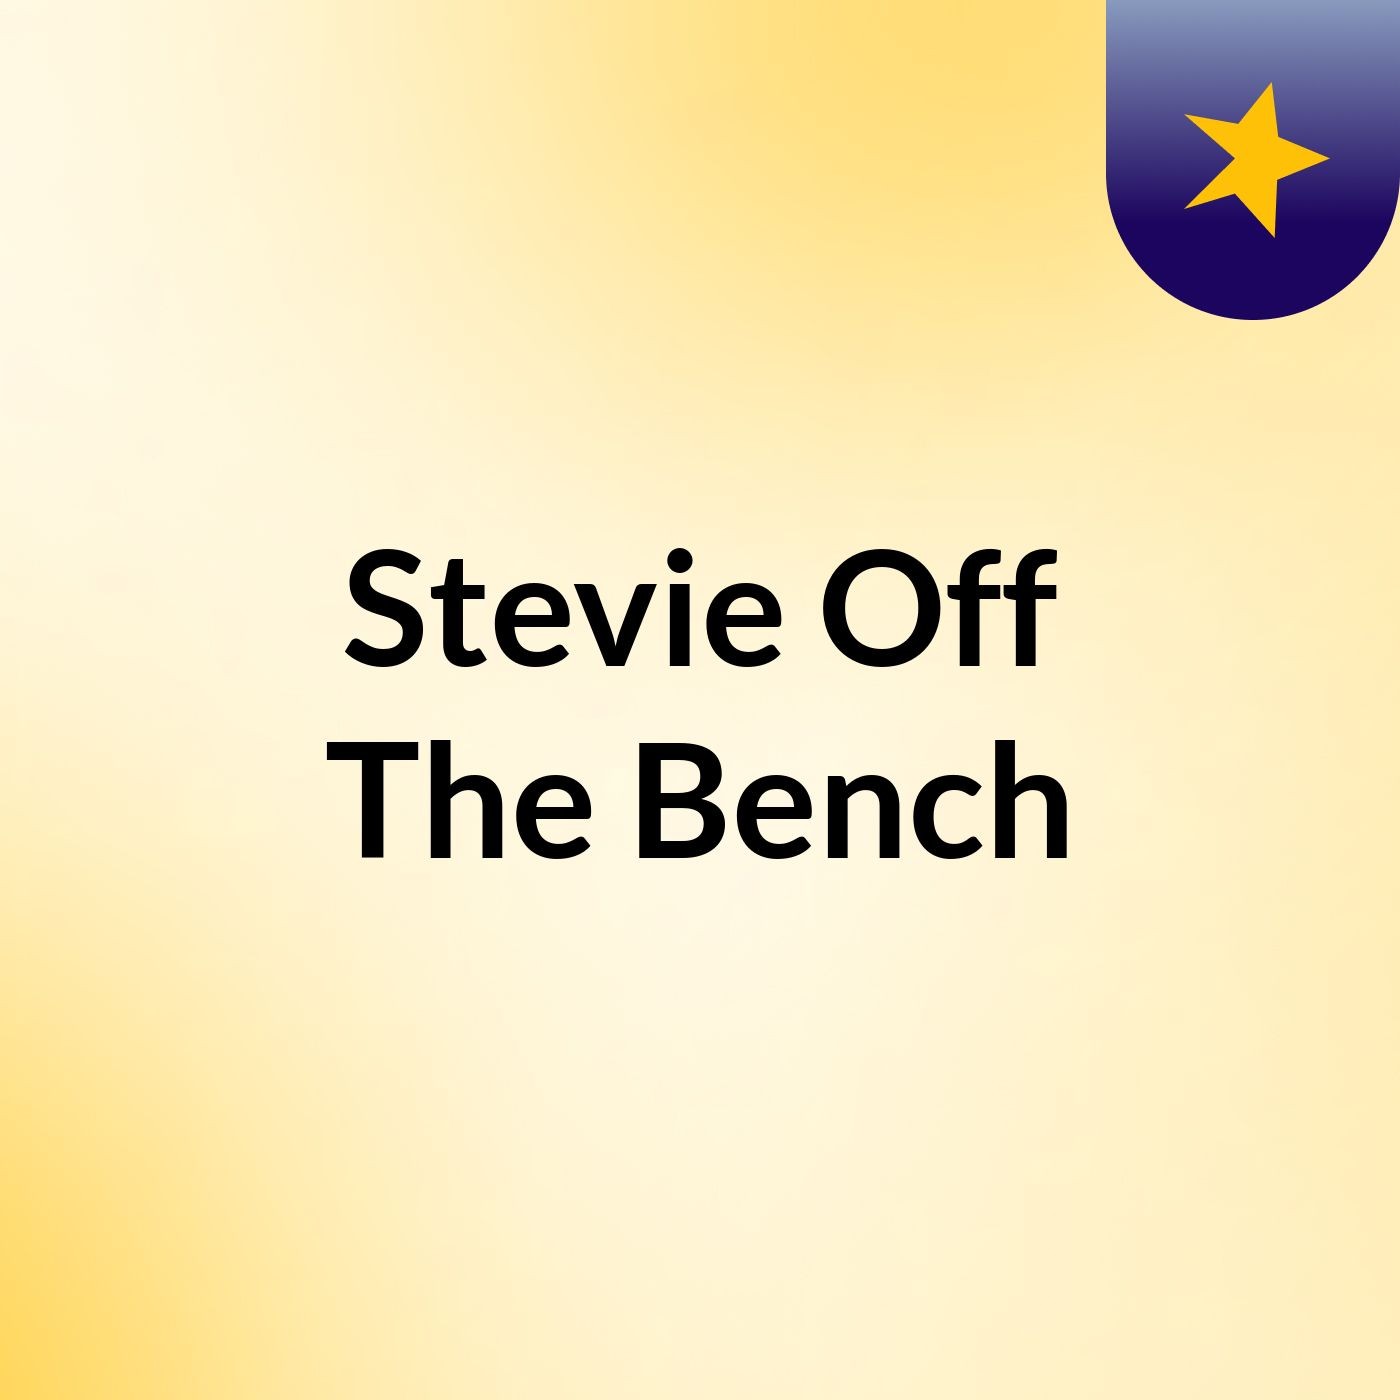 Stevie Off The Bench